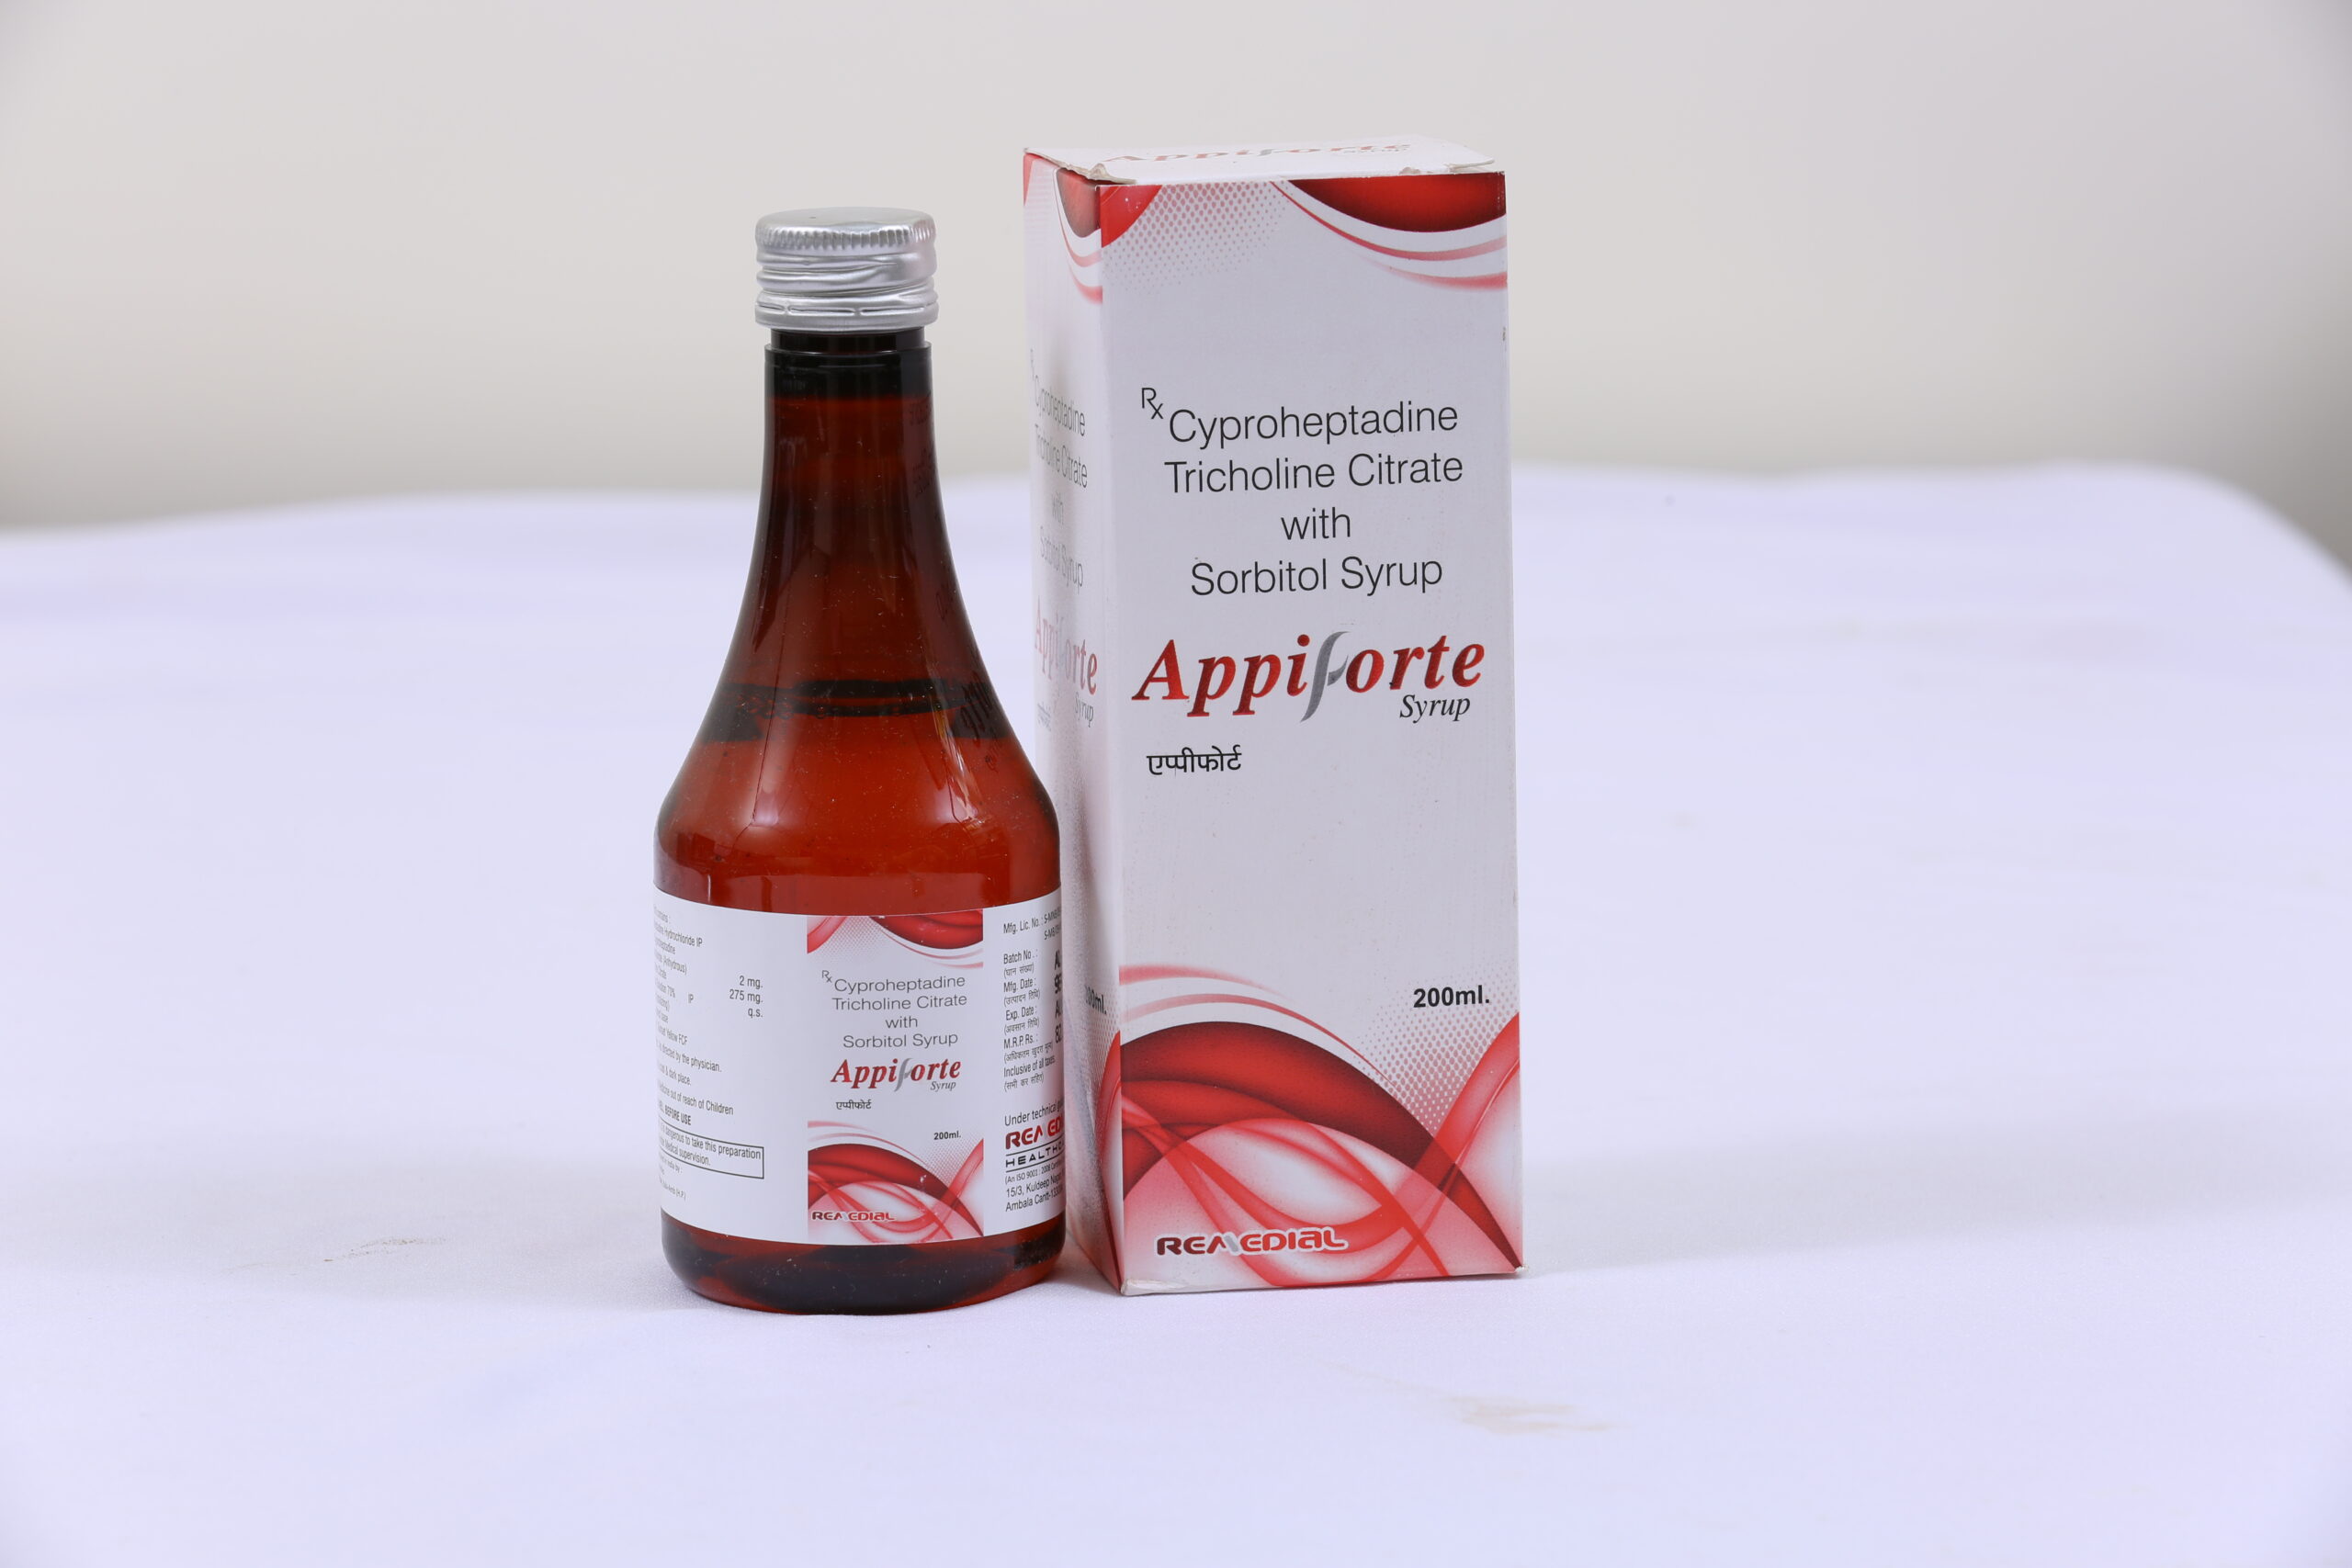 APPIFORTE (Cyproheptadine HCl + Tricoline Citrate + Sorbitol solu)